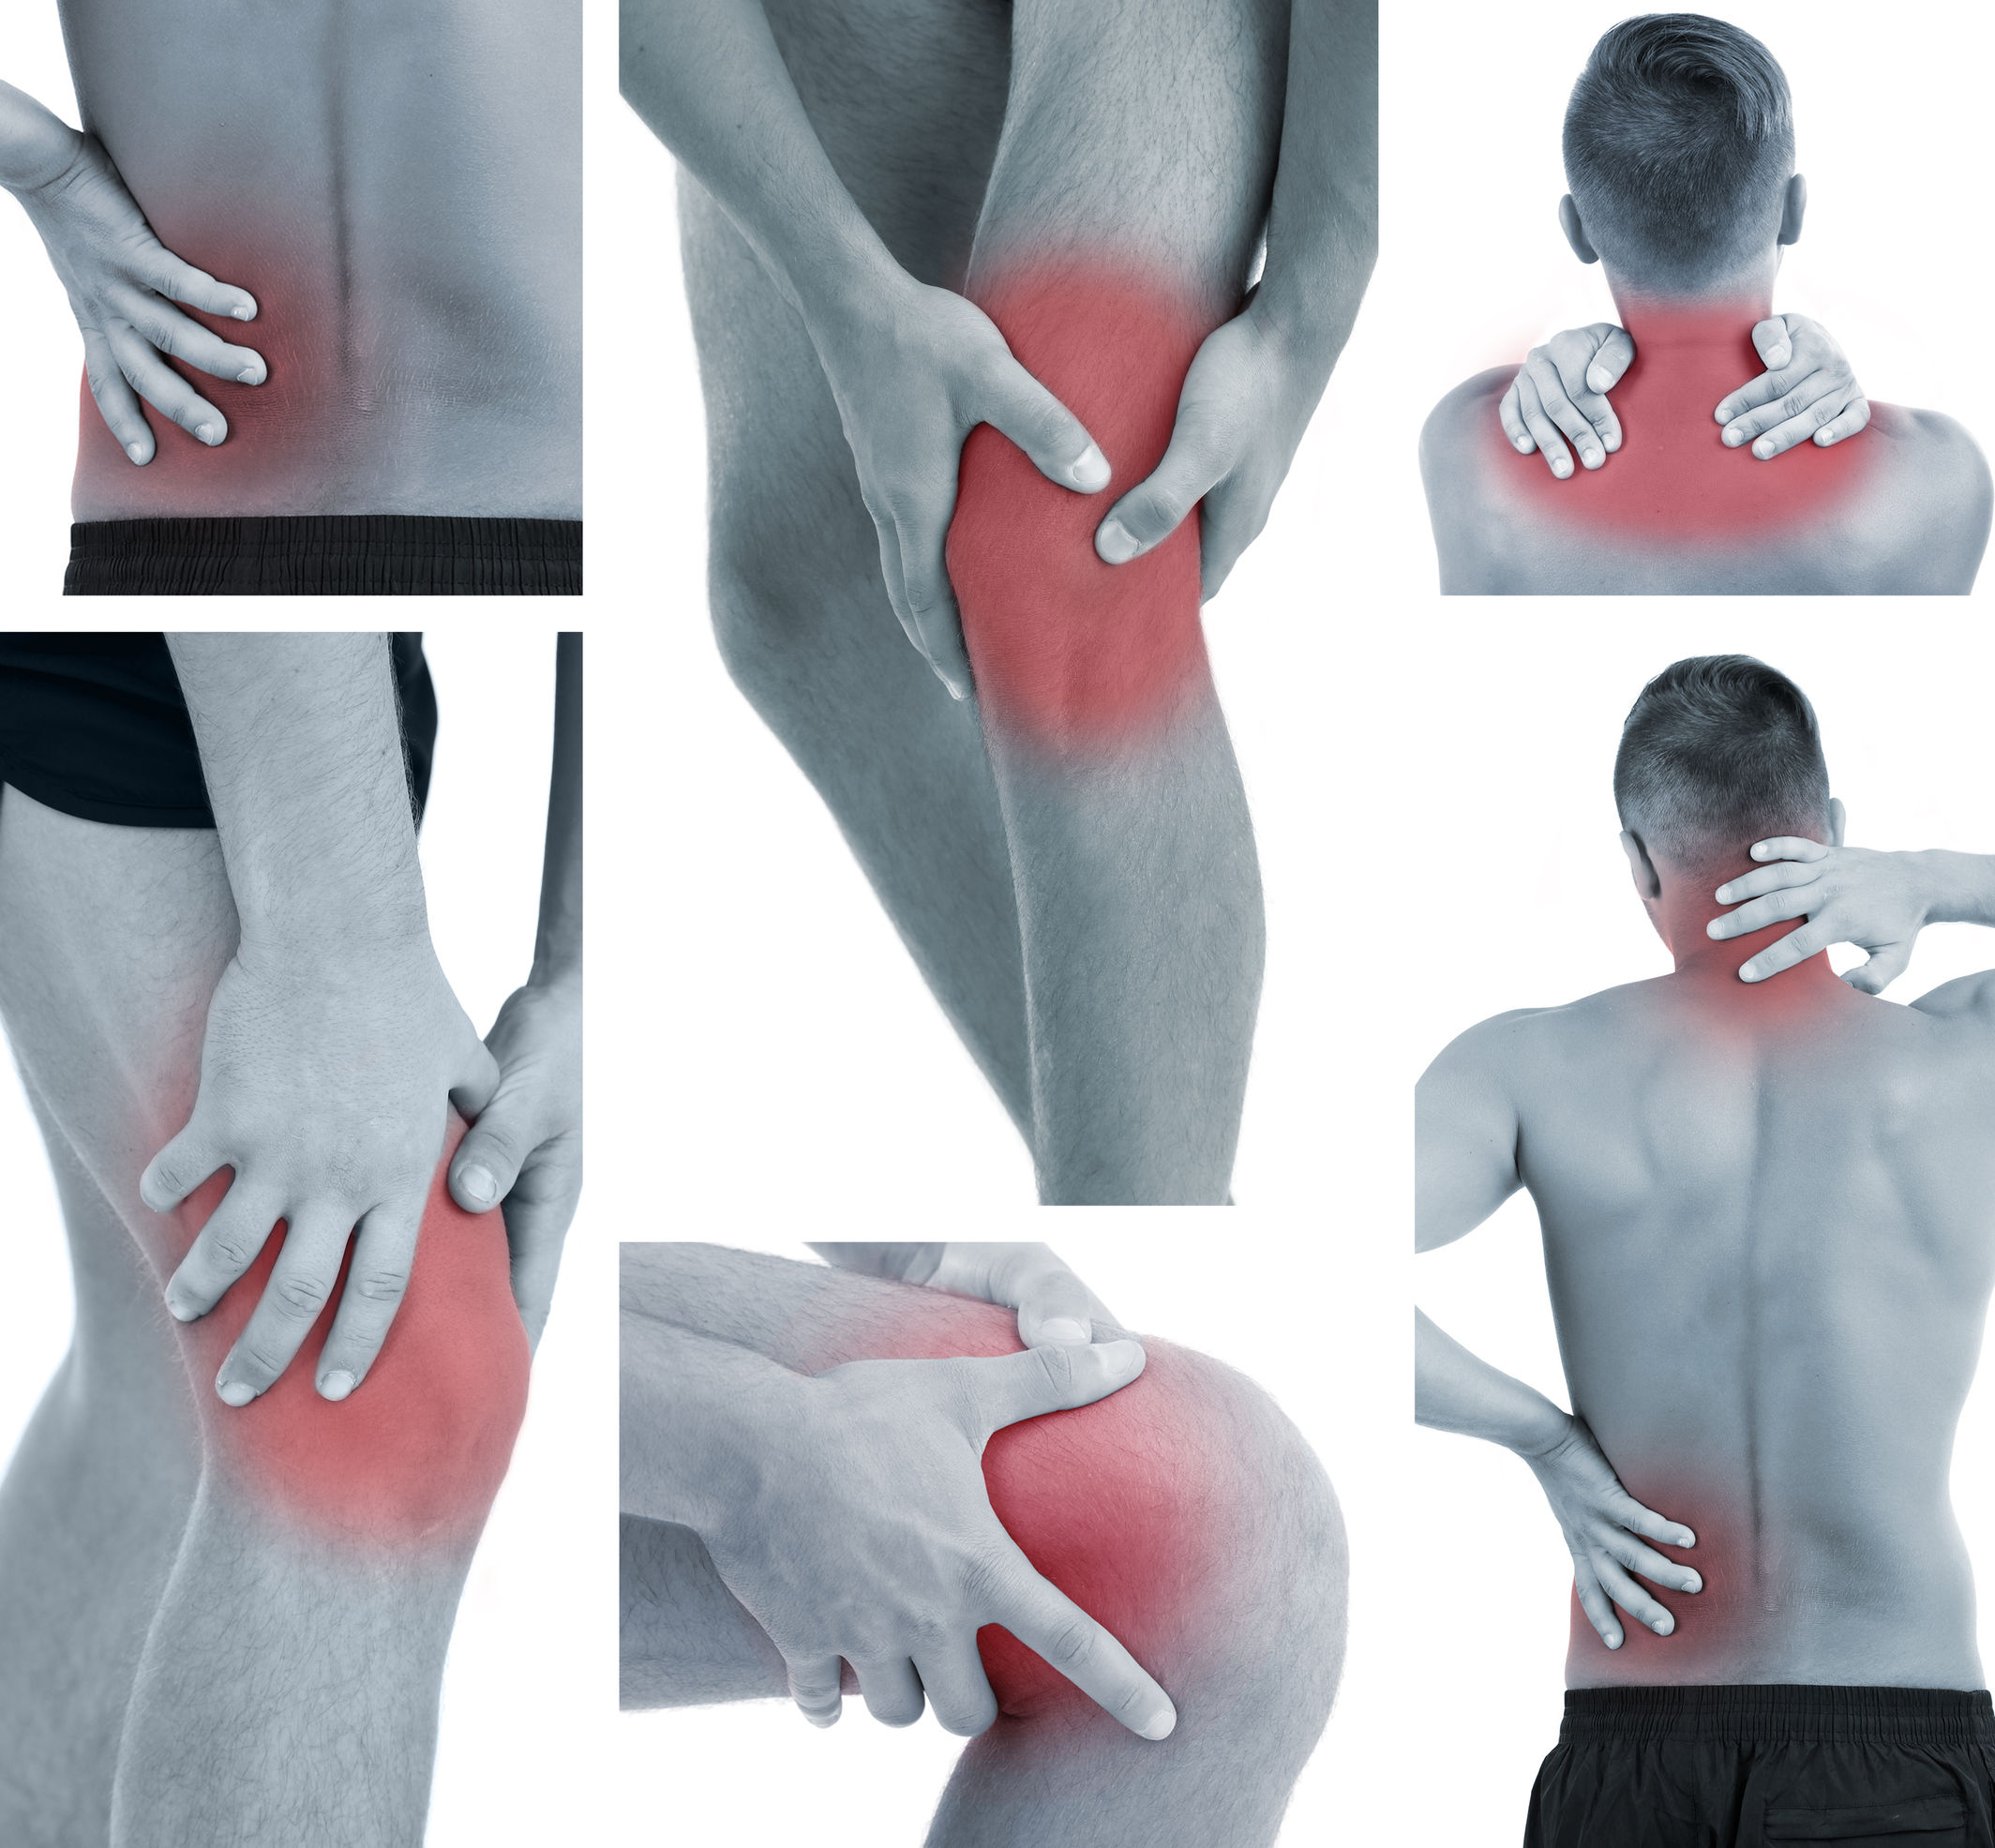 Image result for joint pain pictures